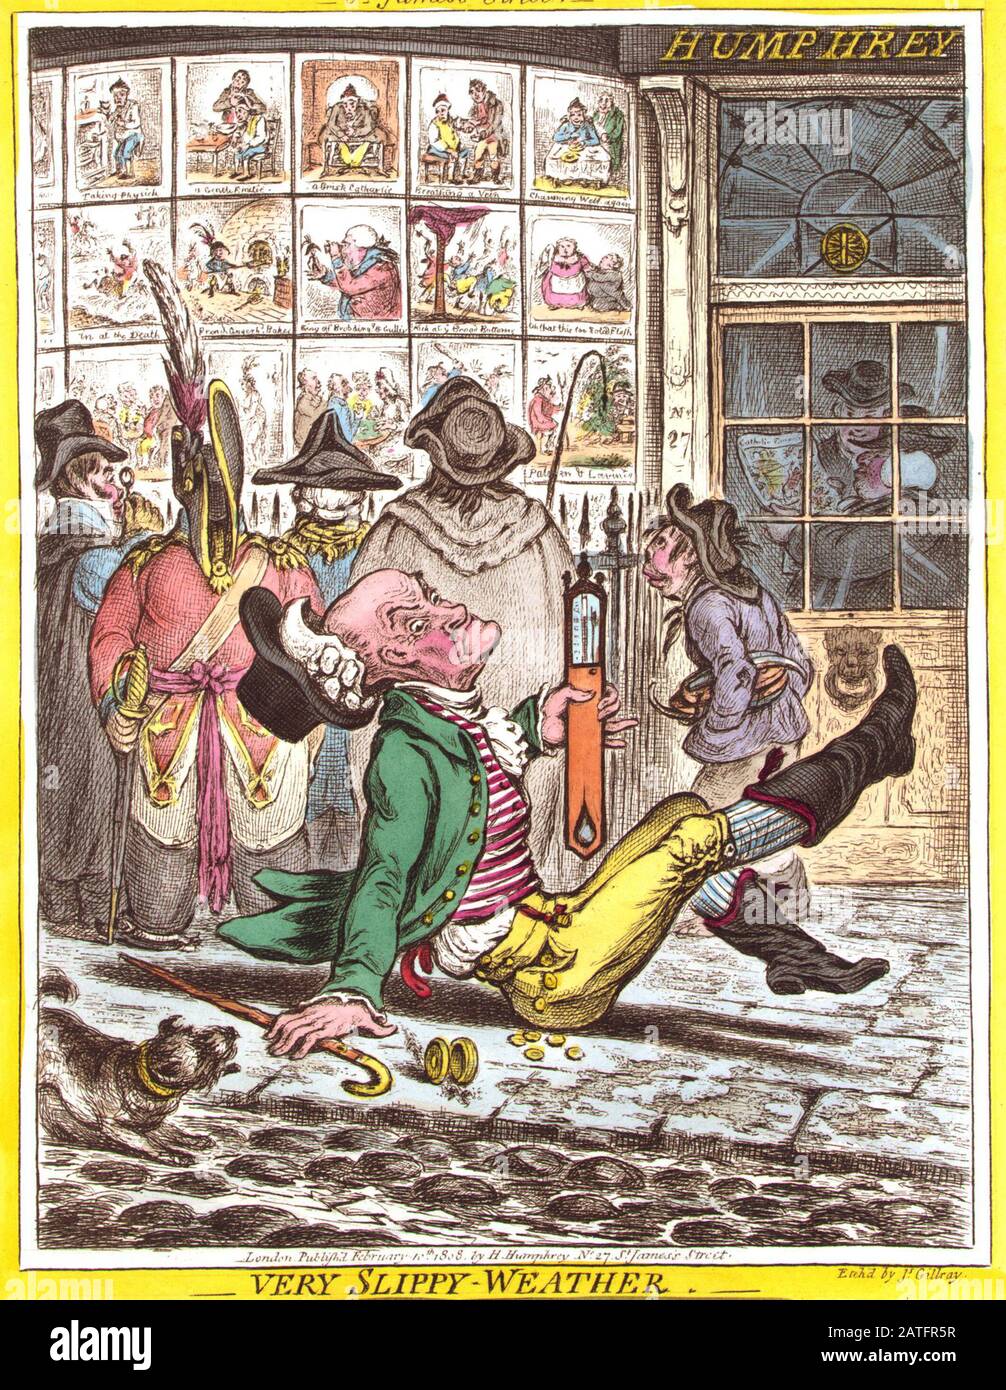 Very Slippy-Weather (1808) by James Gillray. Cartoon shows an elderly man who has slipped and fallen on the sidewalk outside Humphrey's printing establishment at No. 27 St. James's Street, London. He is holding a thermometer which he manages keep upright, behind him are five individuals looking at caricatures printed by Humphrey that are on display in the shop windows Stock Photo